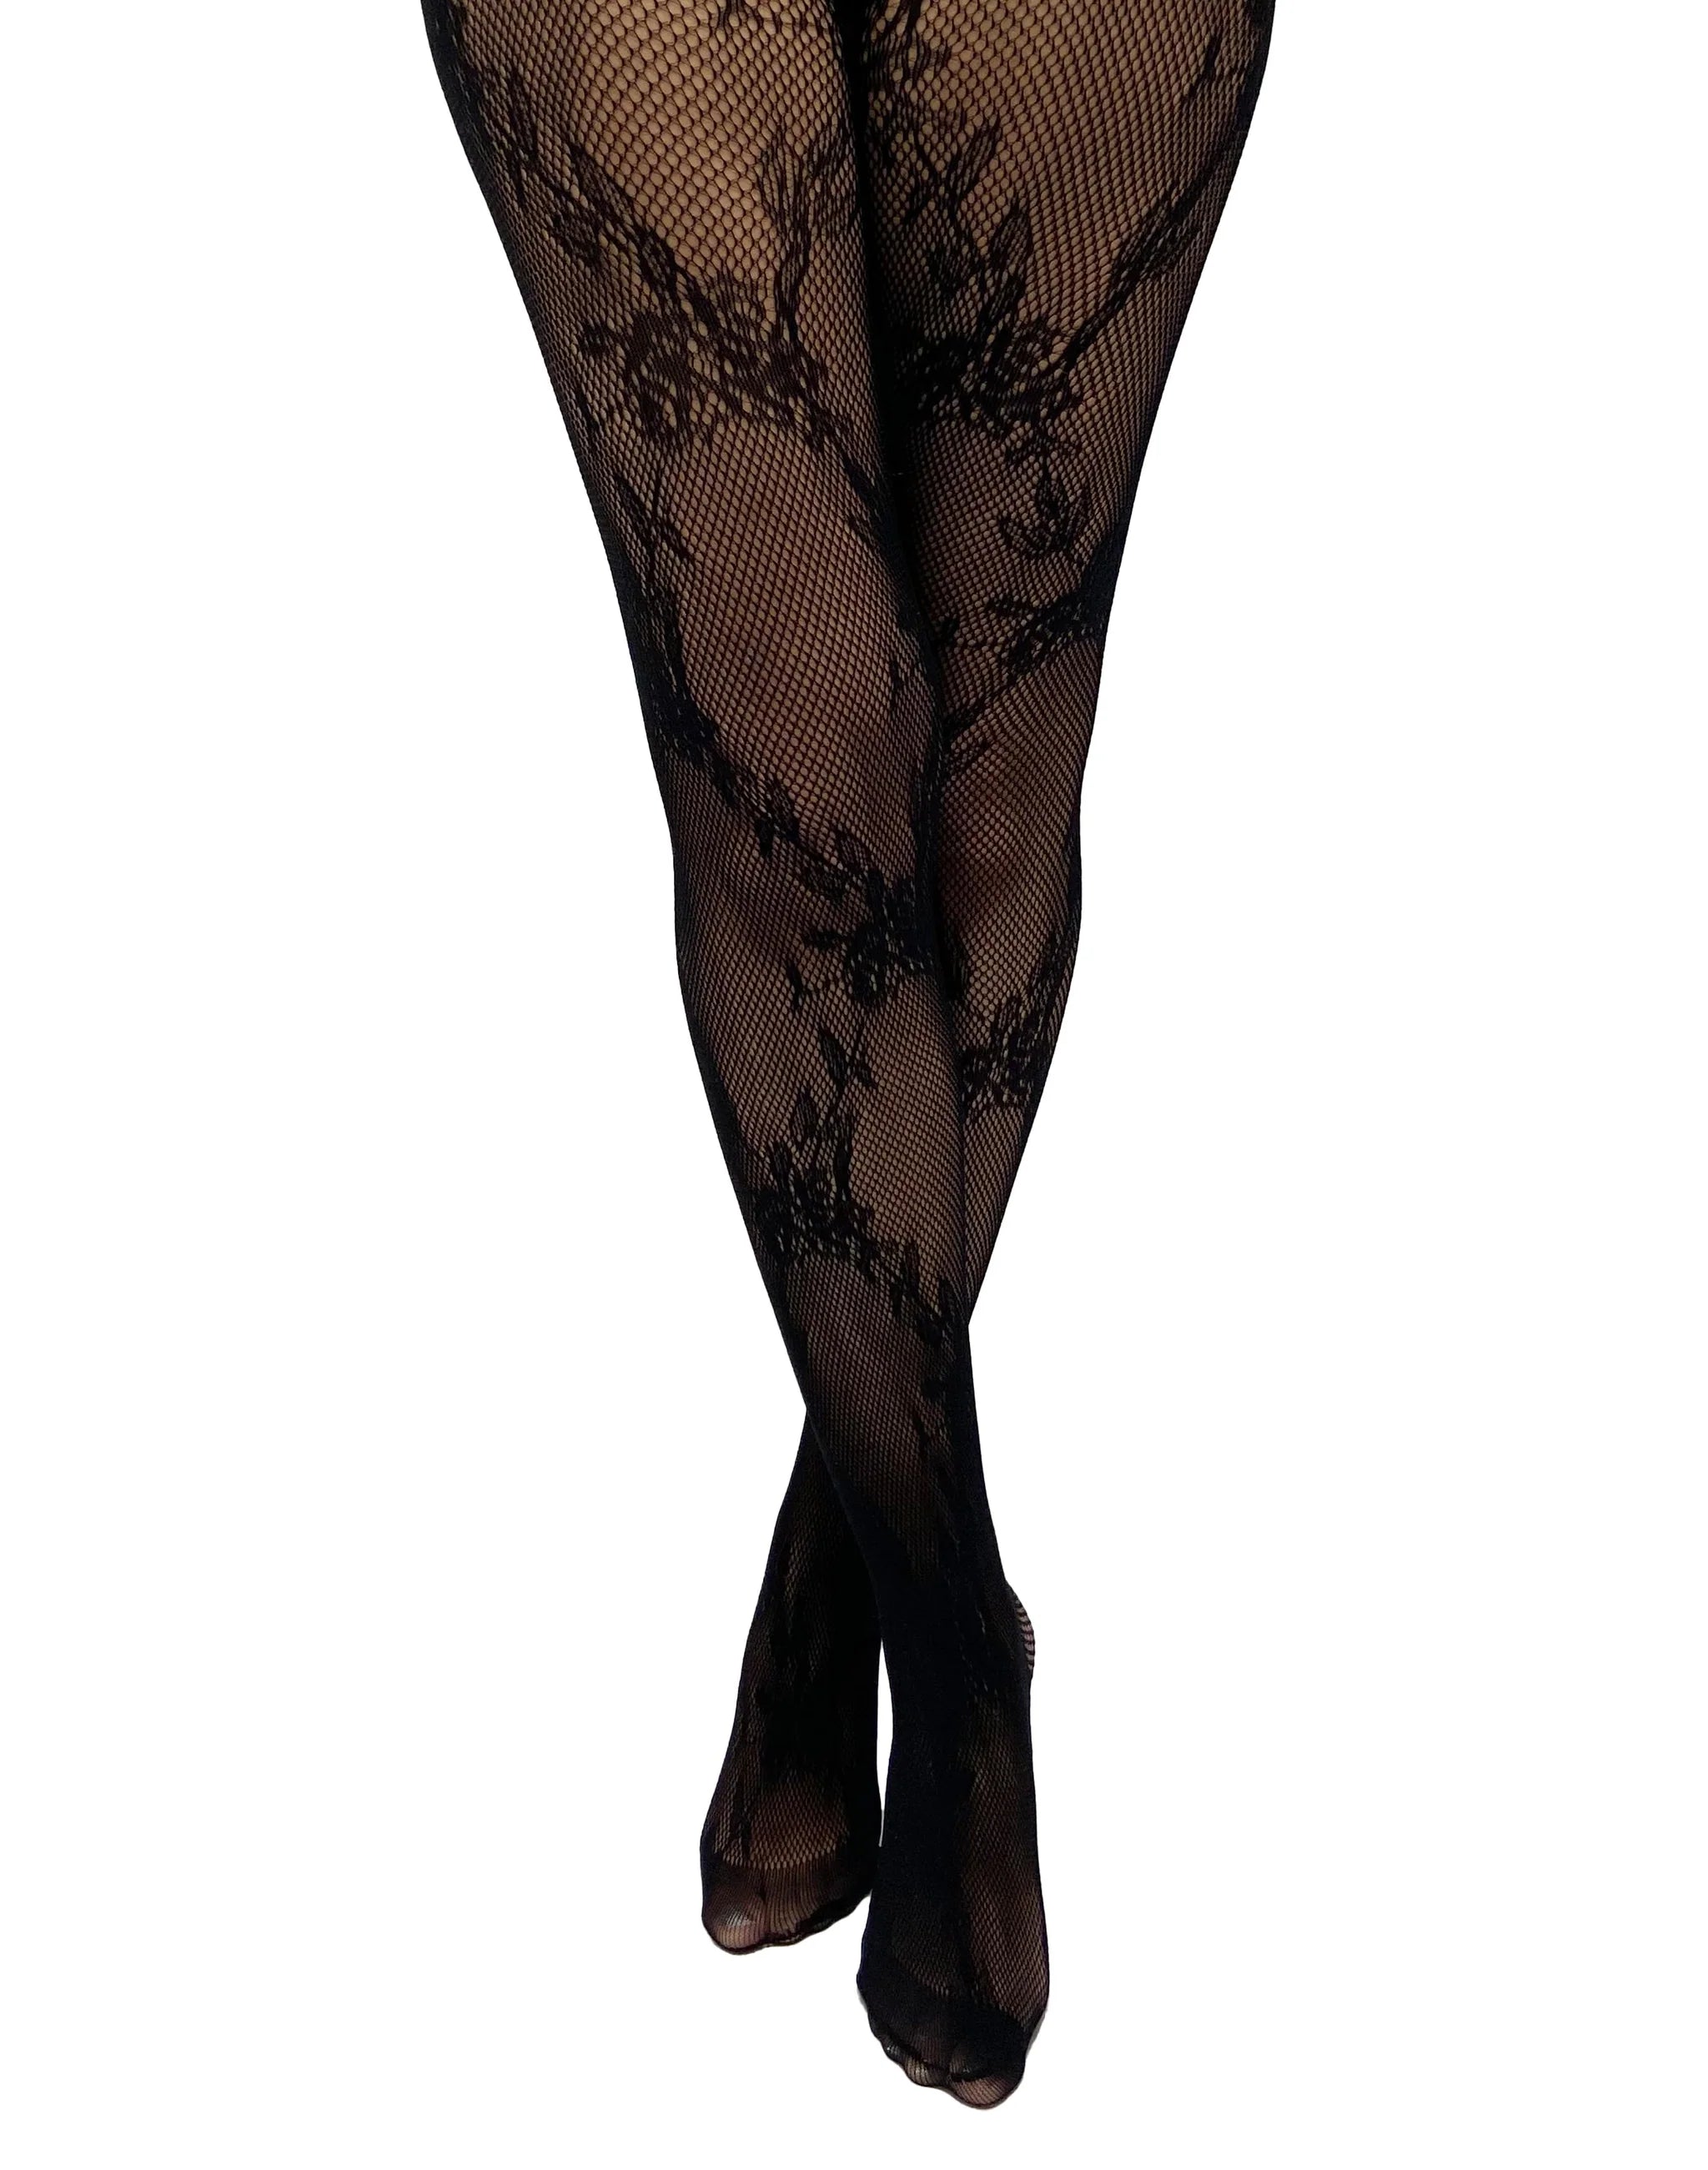 PM Floral Lace Diamond Net Tights